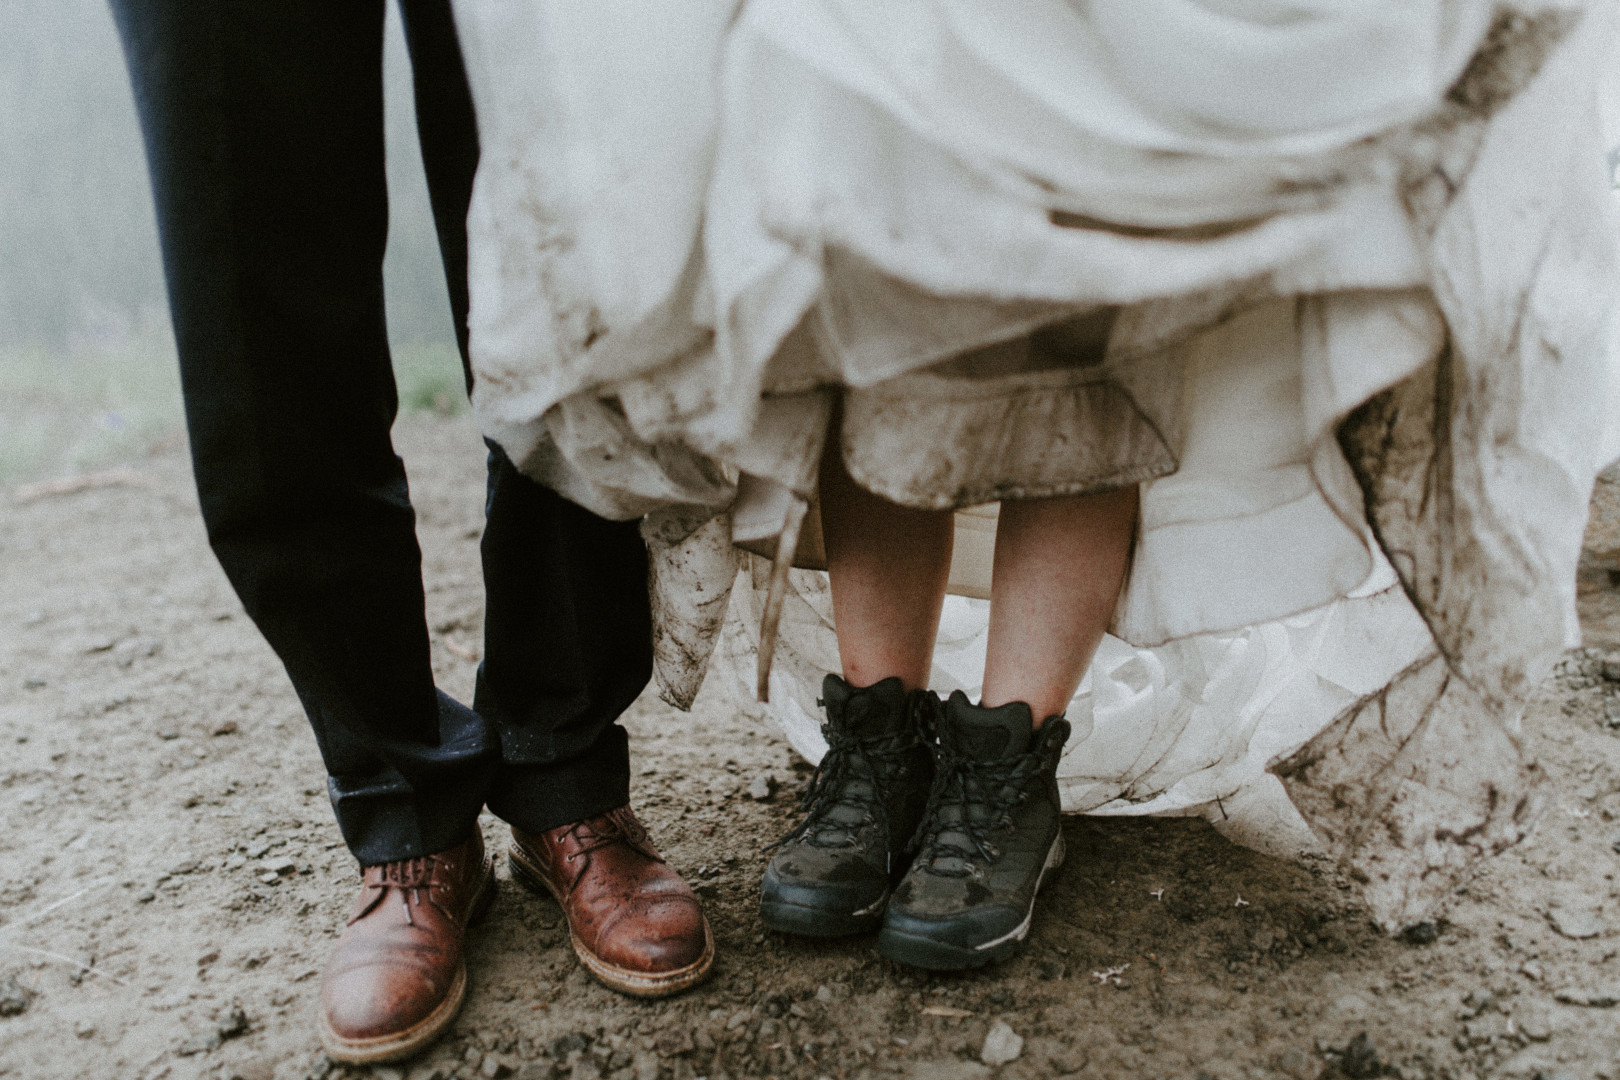 Valerie and Alex show off their muddy boots and shoes. Elopement wedding photography at Mount Hood by Sienna Plus Josh.